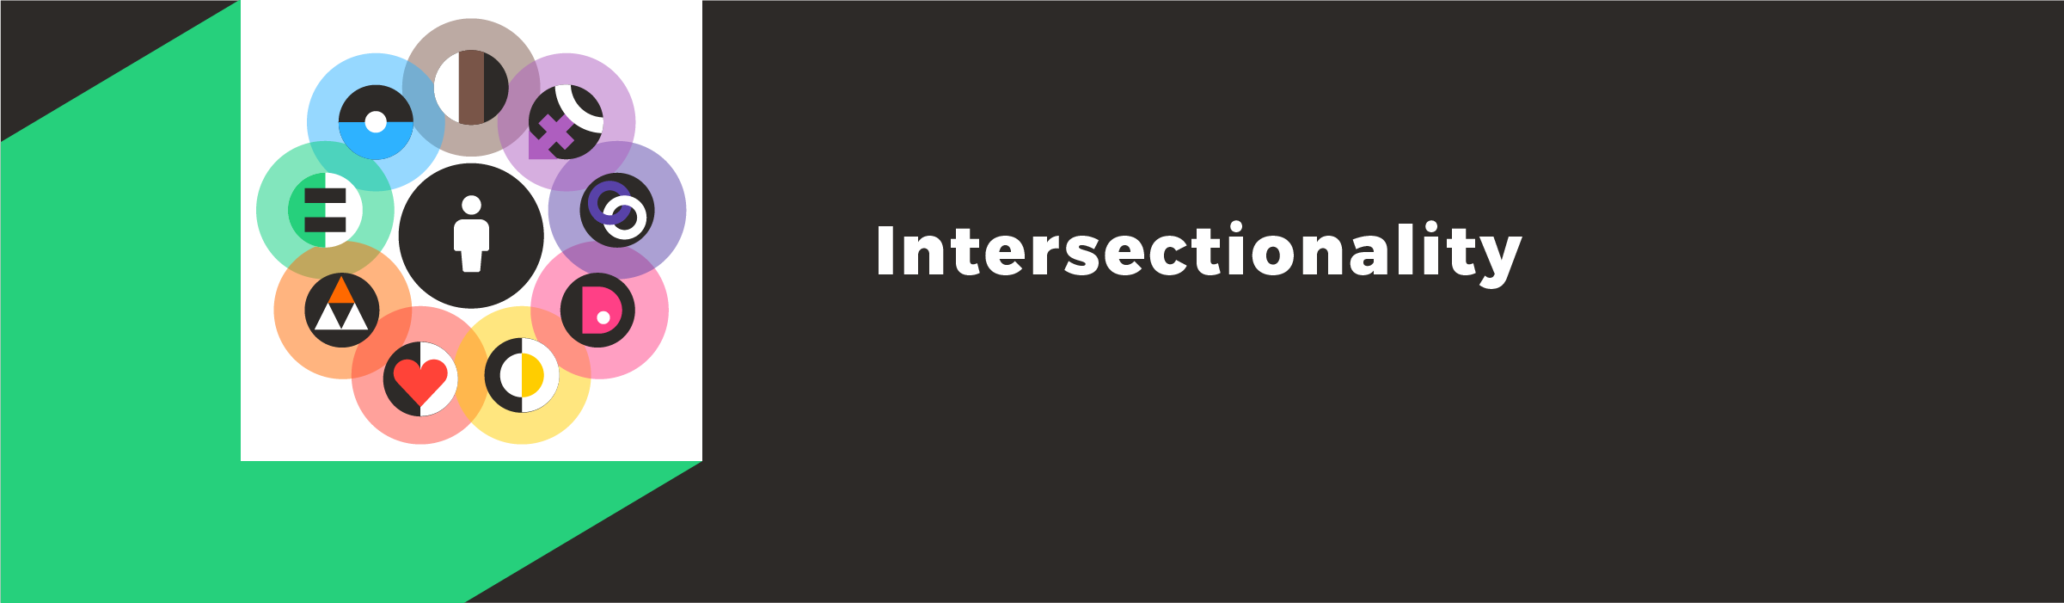 Intersectionality Header with text